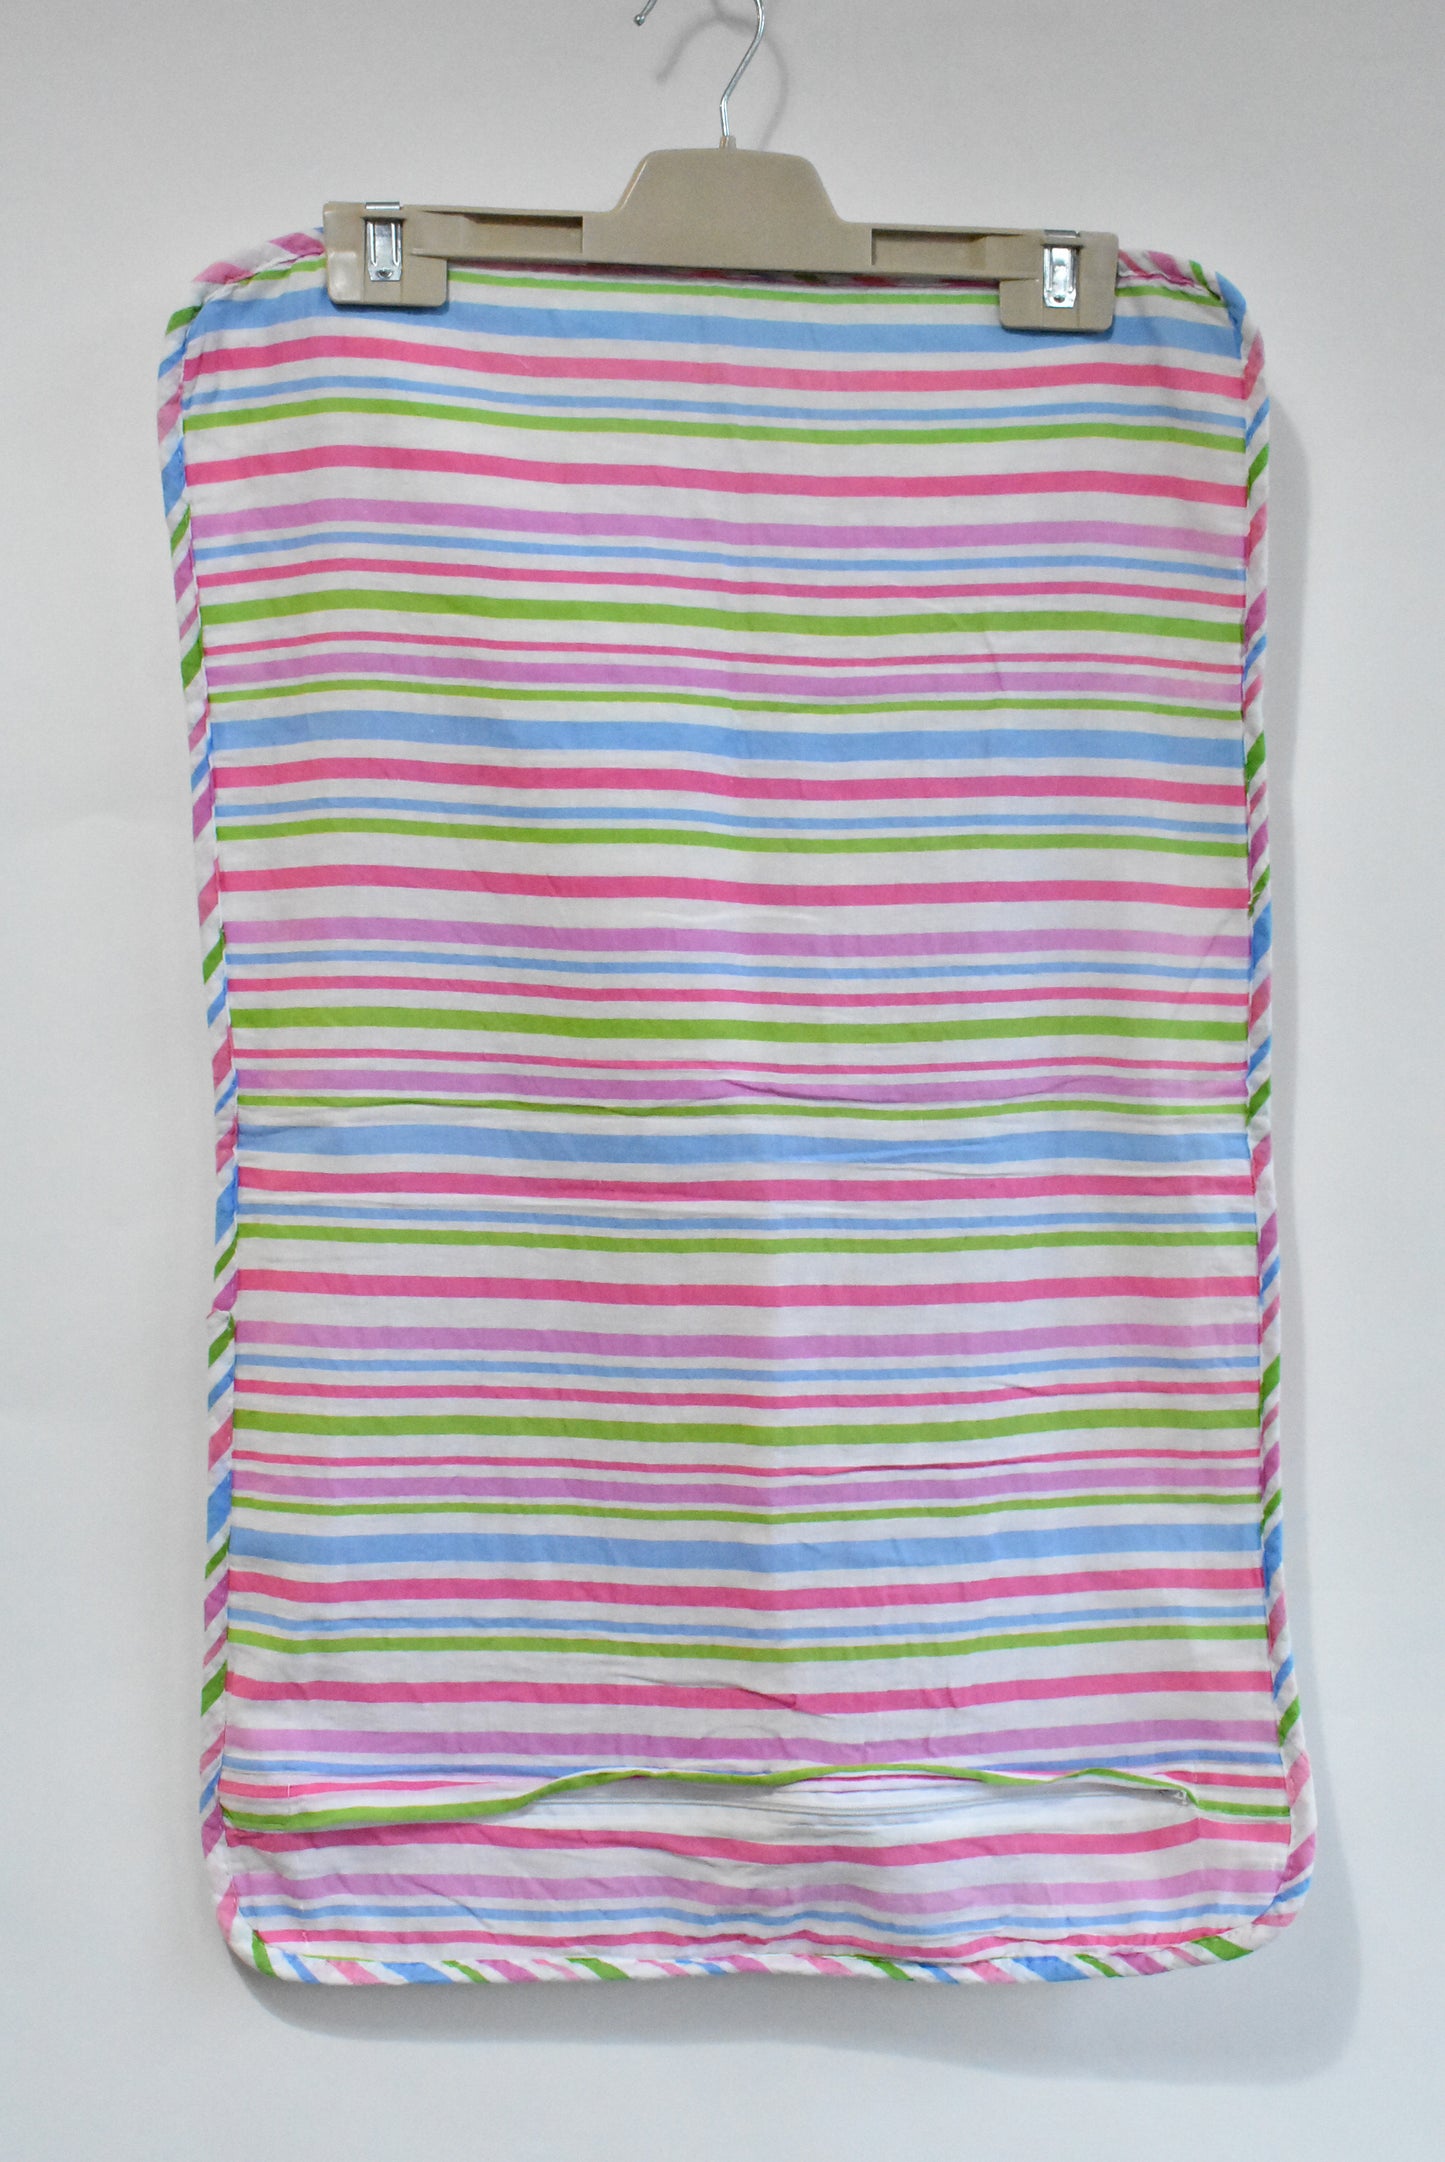 Kovers for Kids 100% cotton double quilt and pillowcase